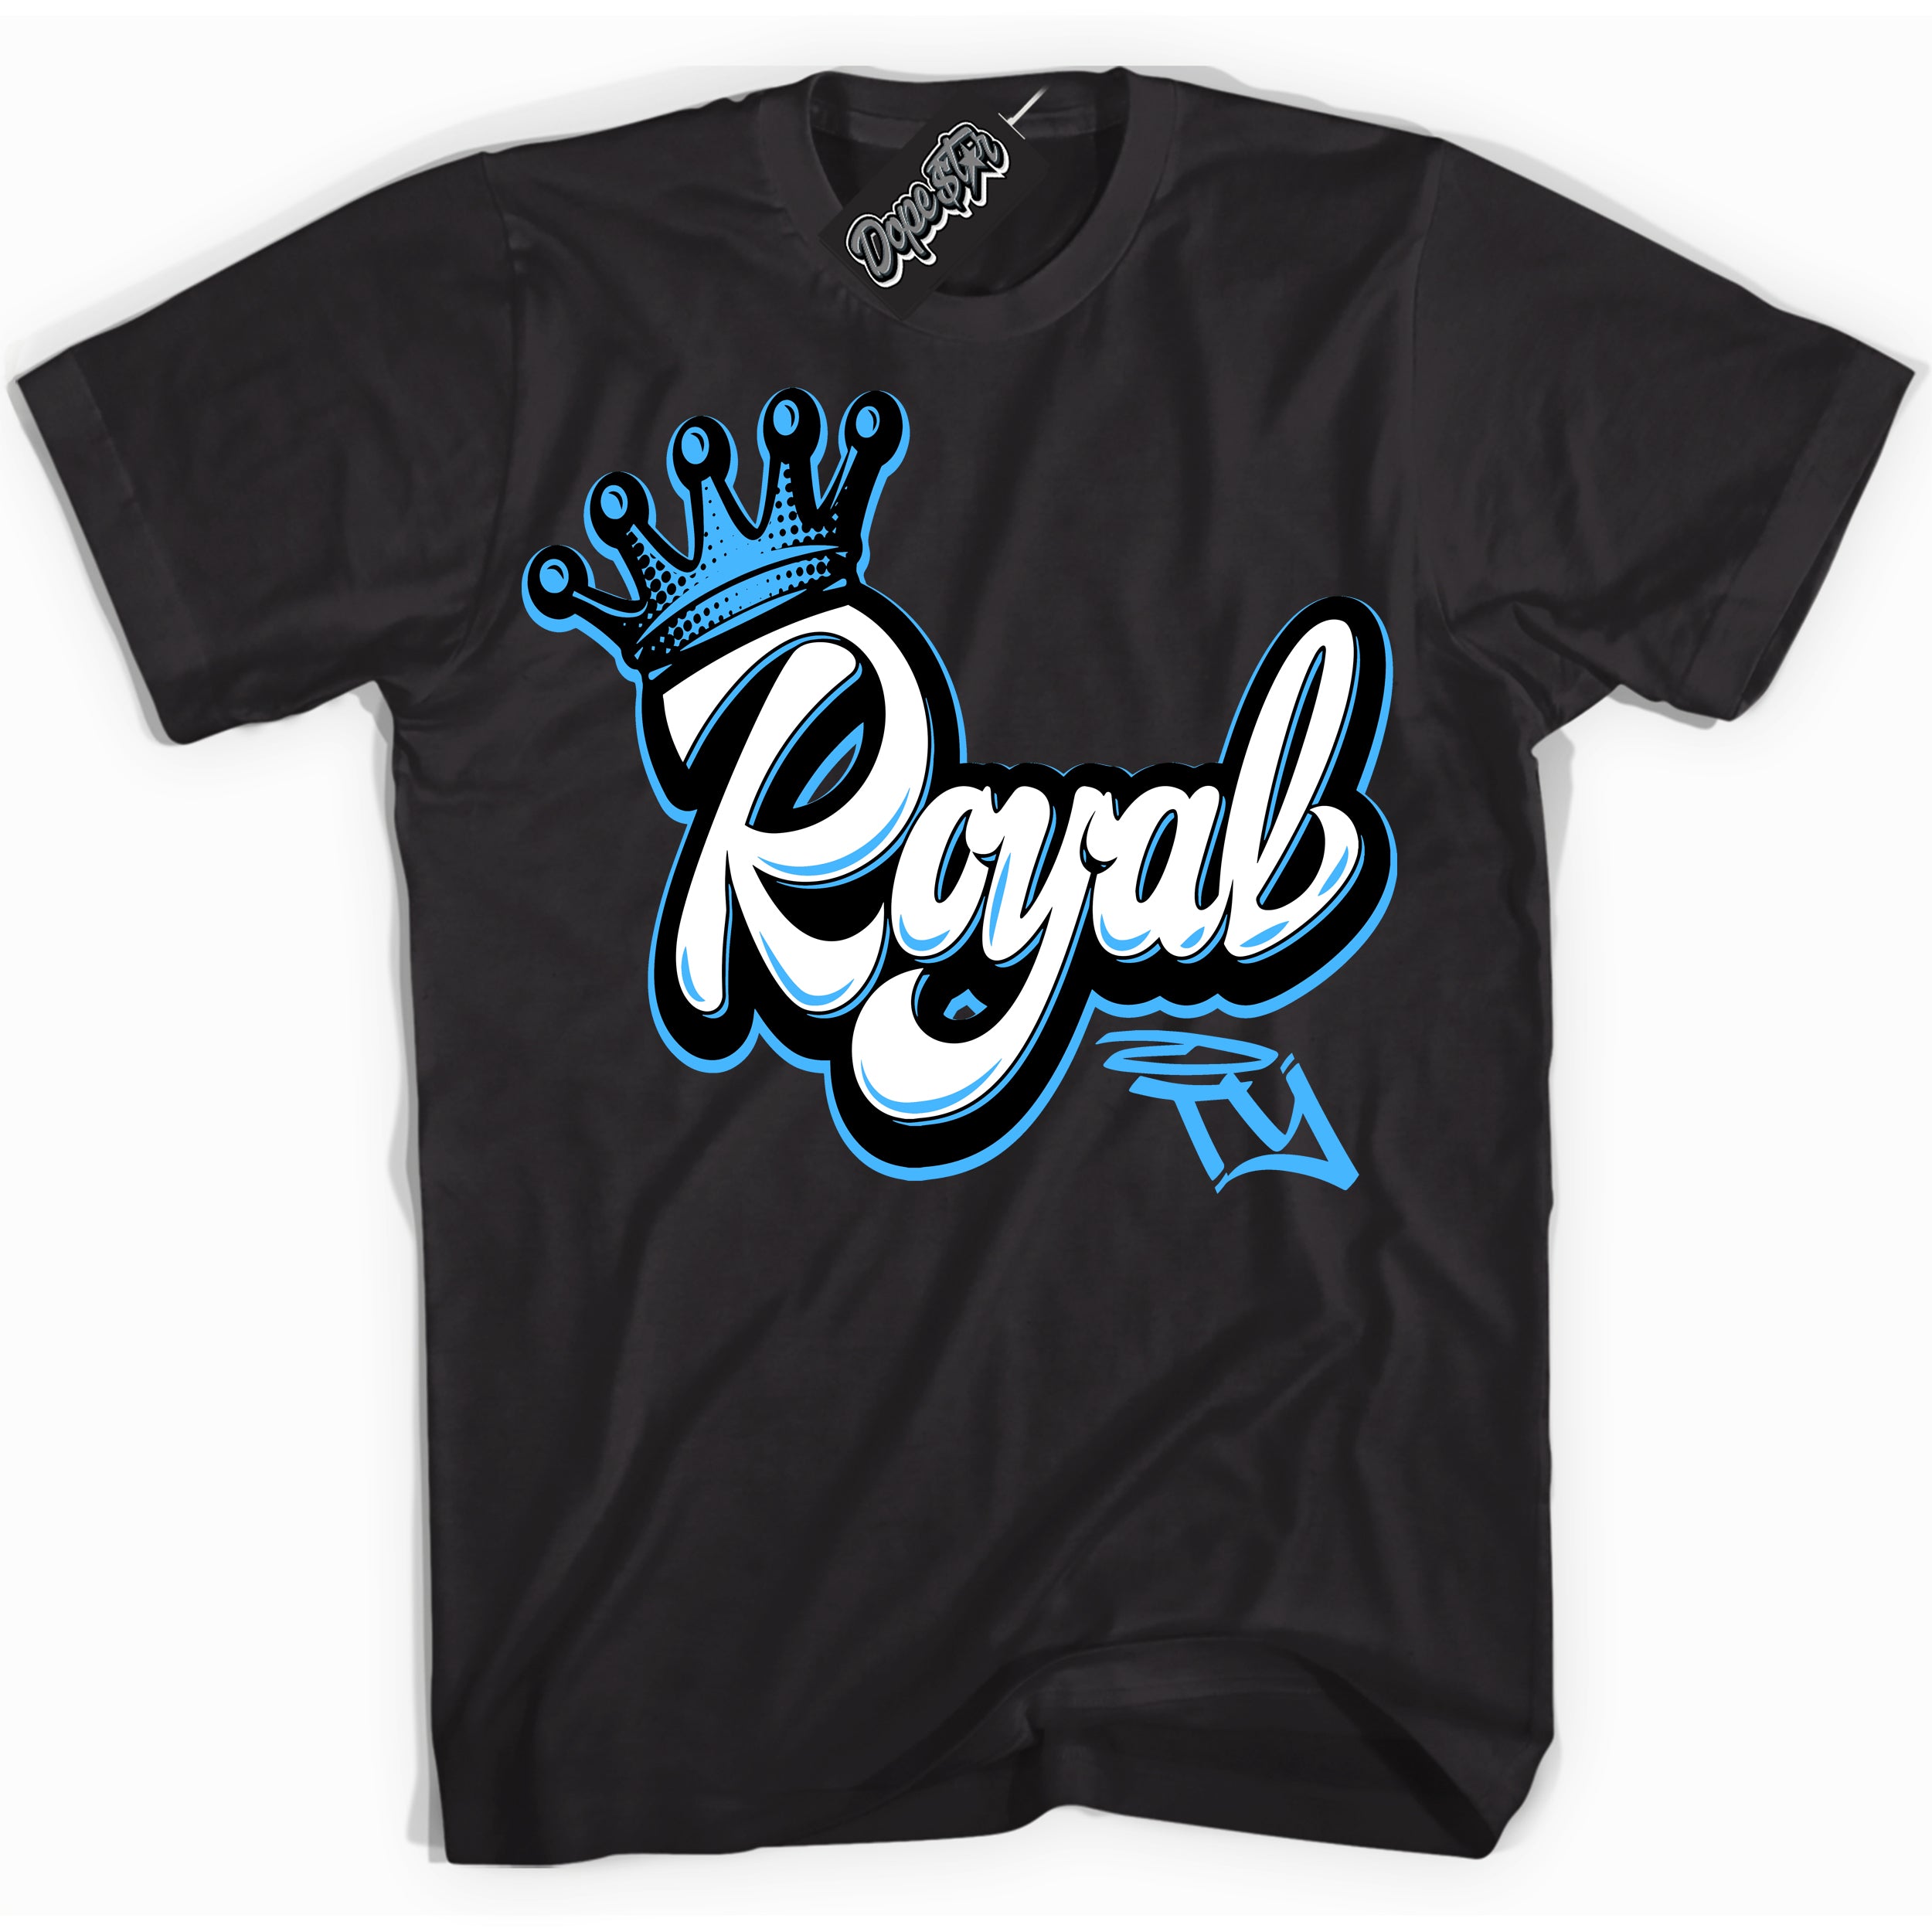 Cool Black graphic tee with “ Royalty ” design, that perfectly matches Powder Blue 9s sneakers 